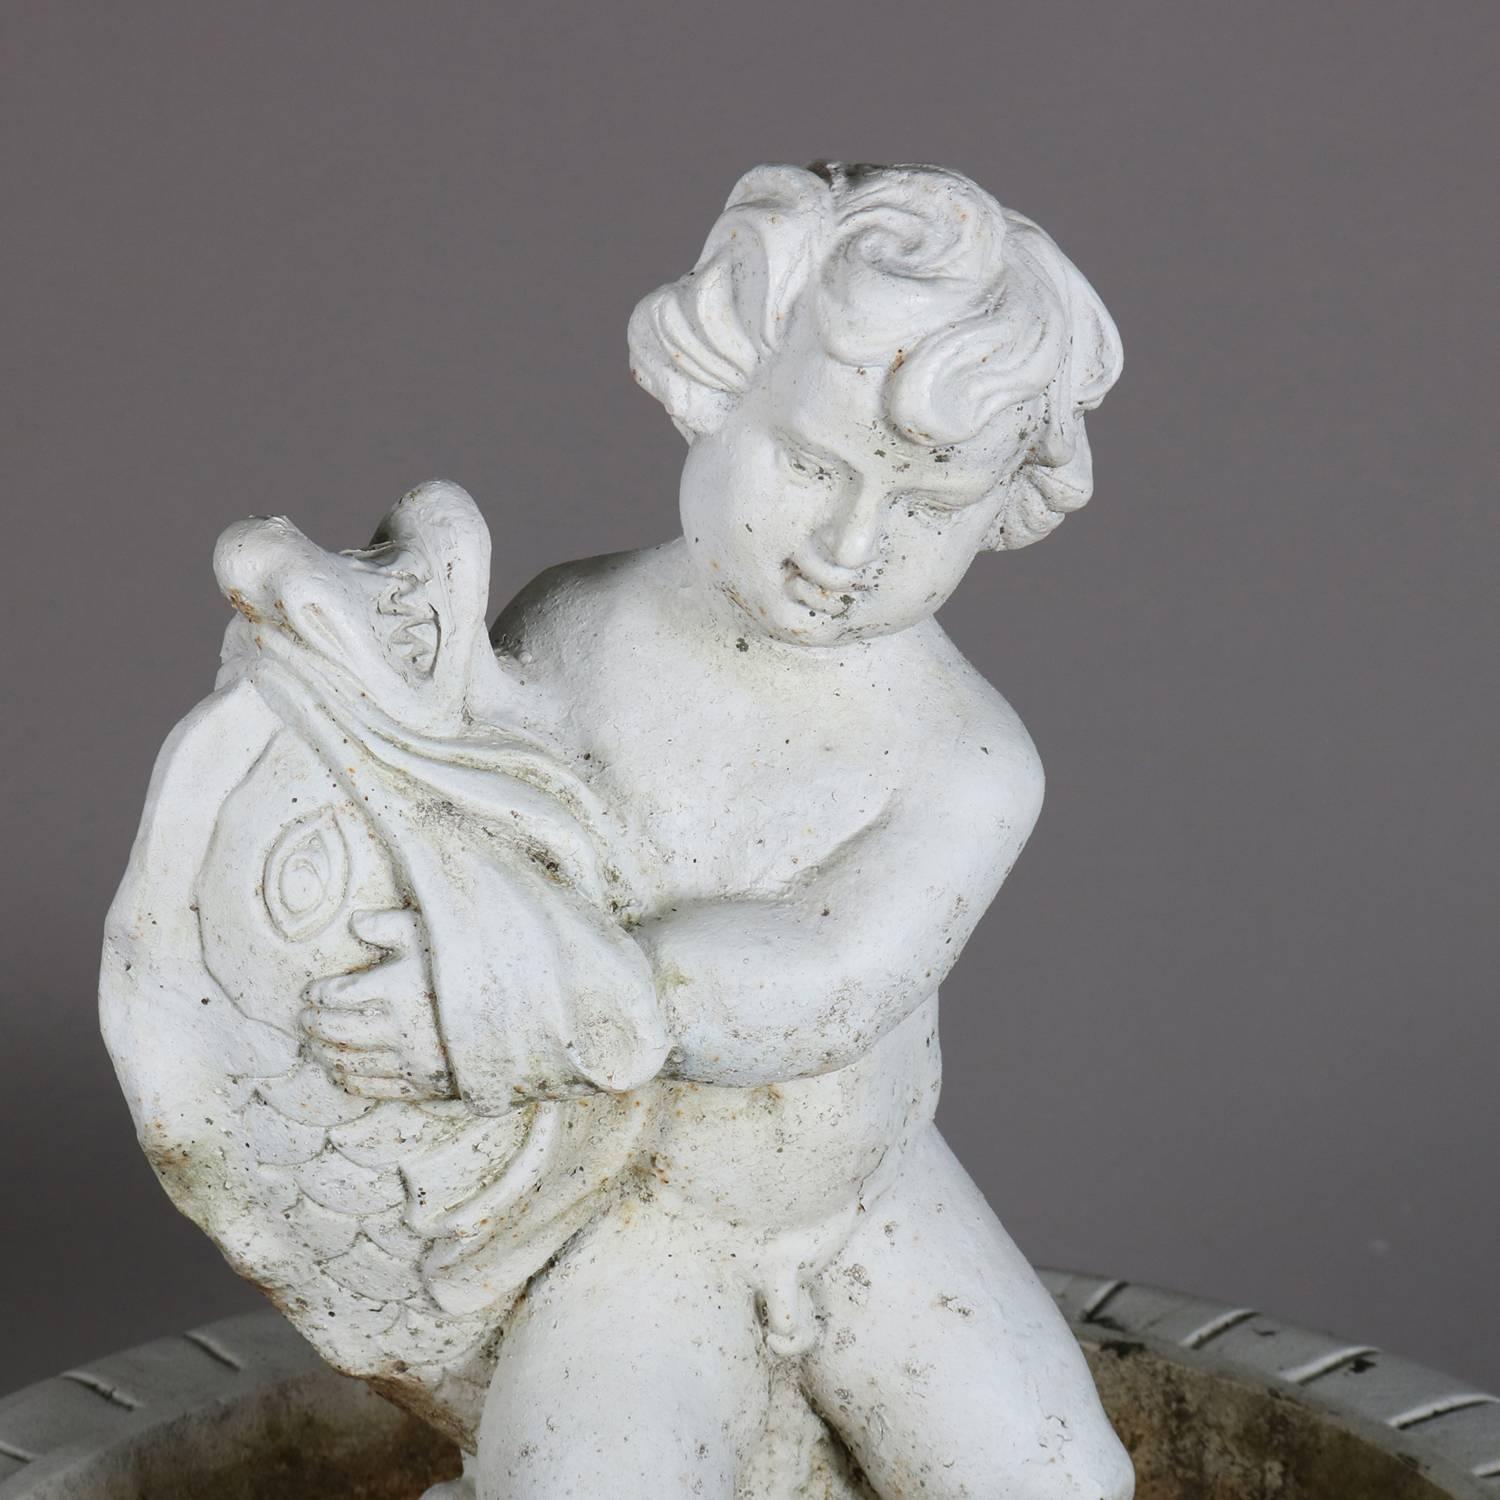 Vintage Fiske School Poseiden cast iron garden bird bath features central cherub in the bowl seated atop plinth surrounded by dolphin and painted white, 20th century.

Measures: 47